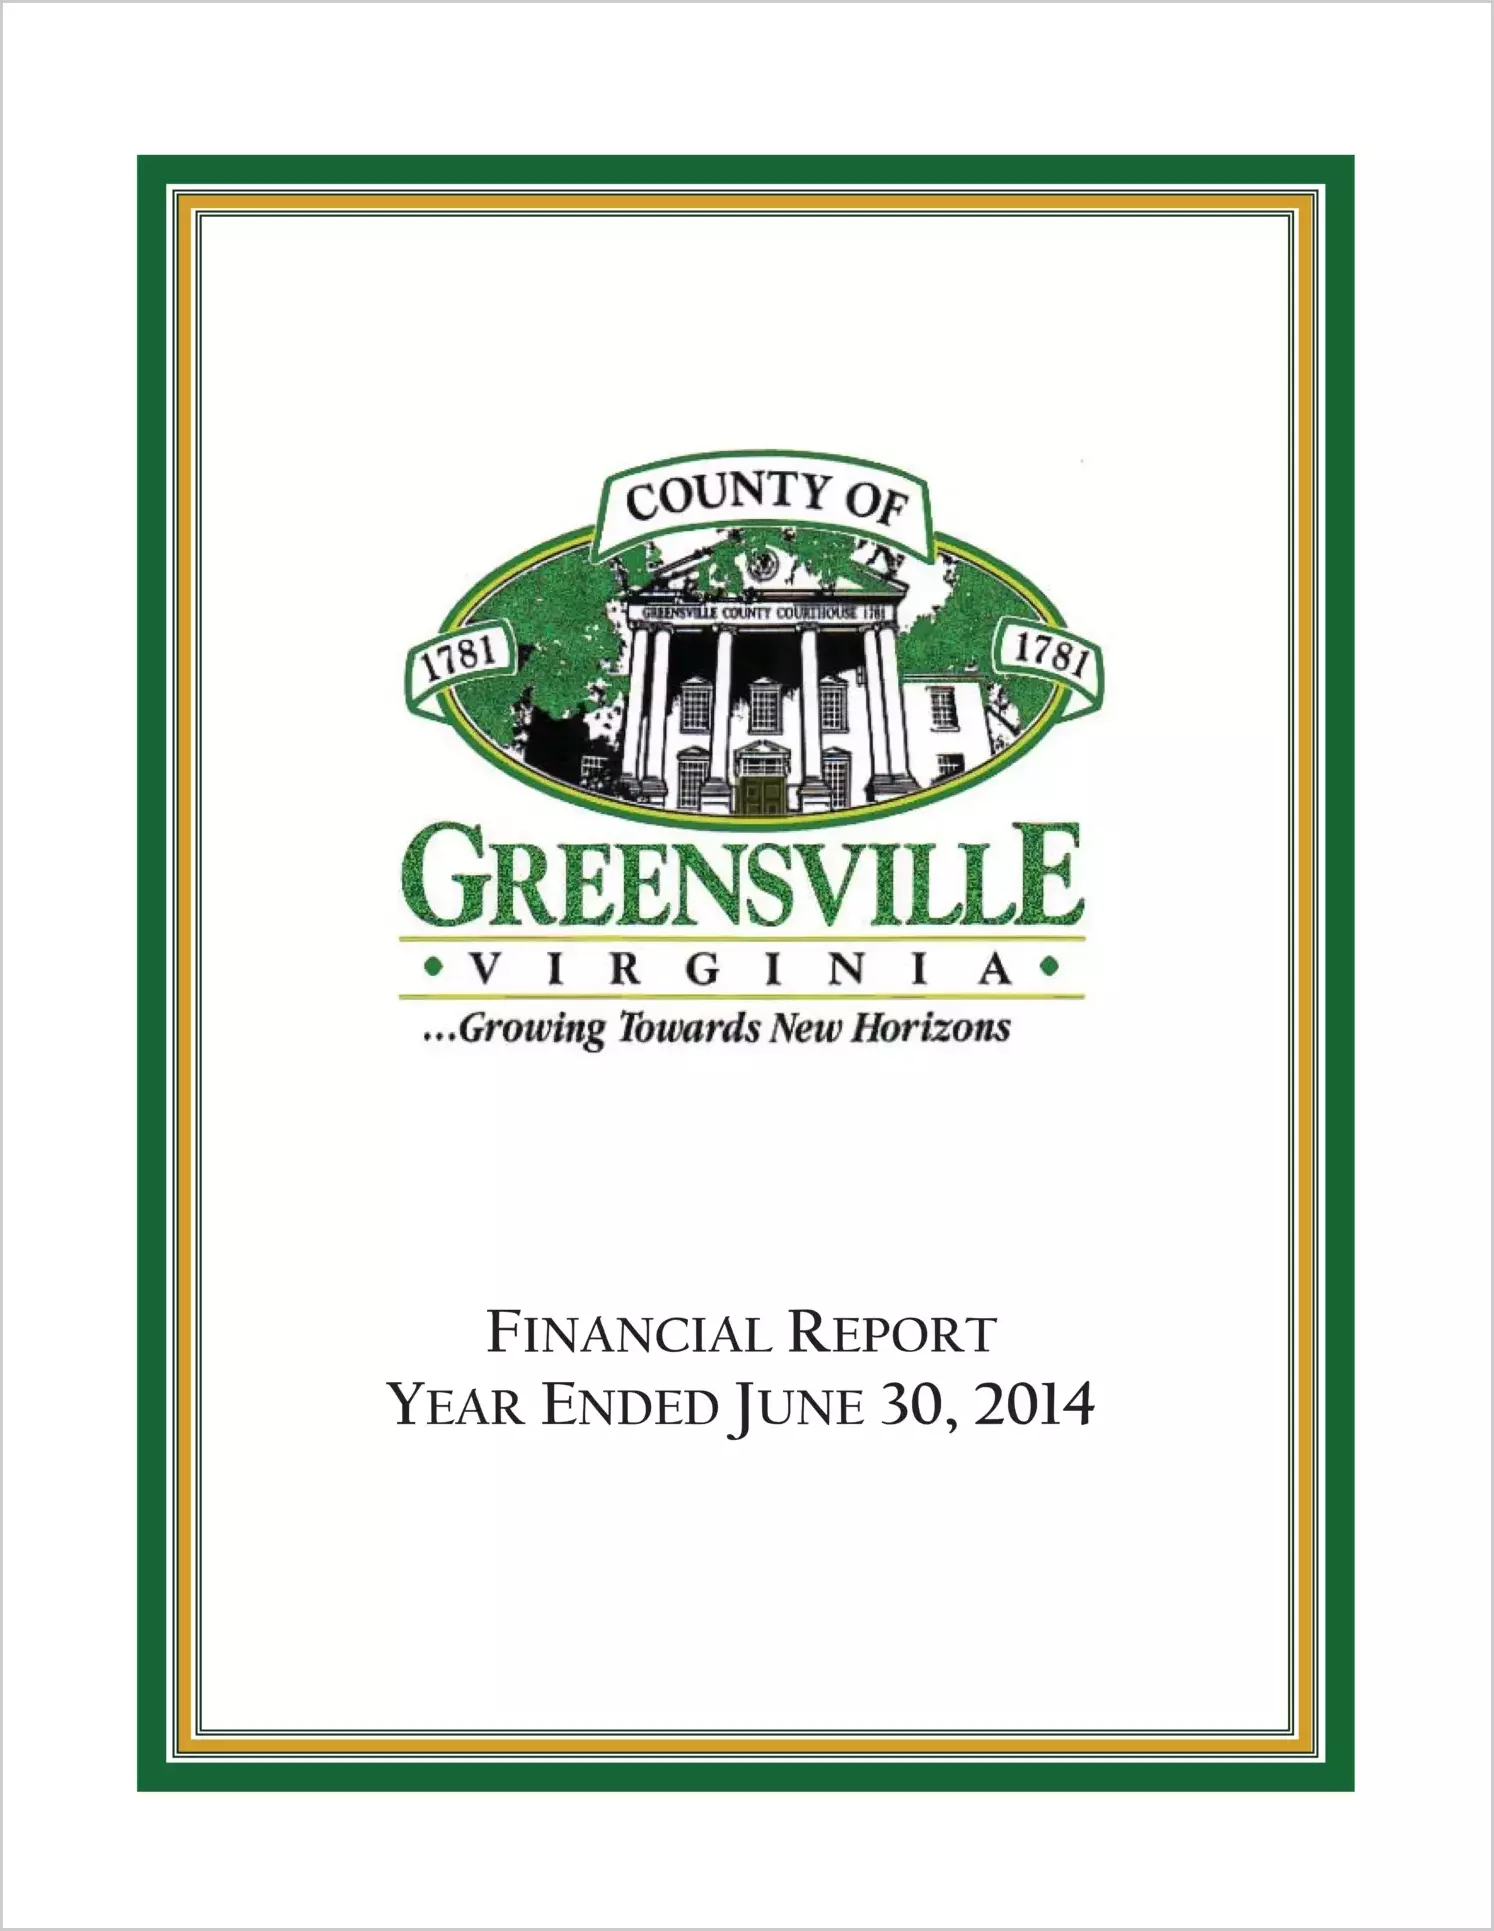 2014 Annual Financial Report for County of Greensville